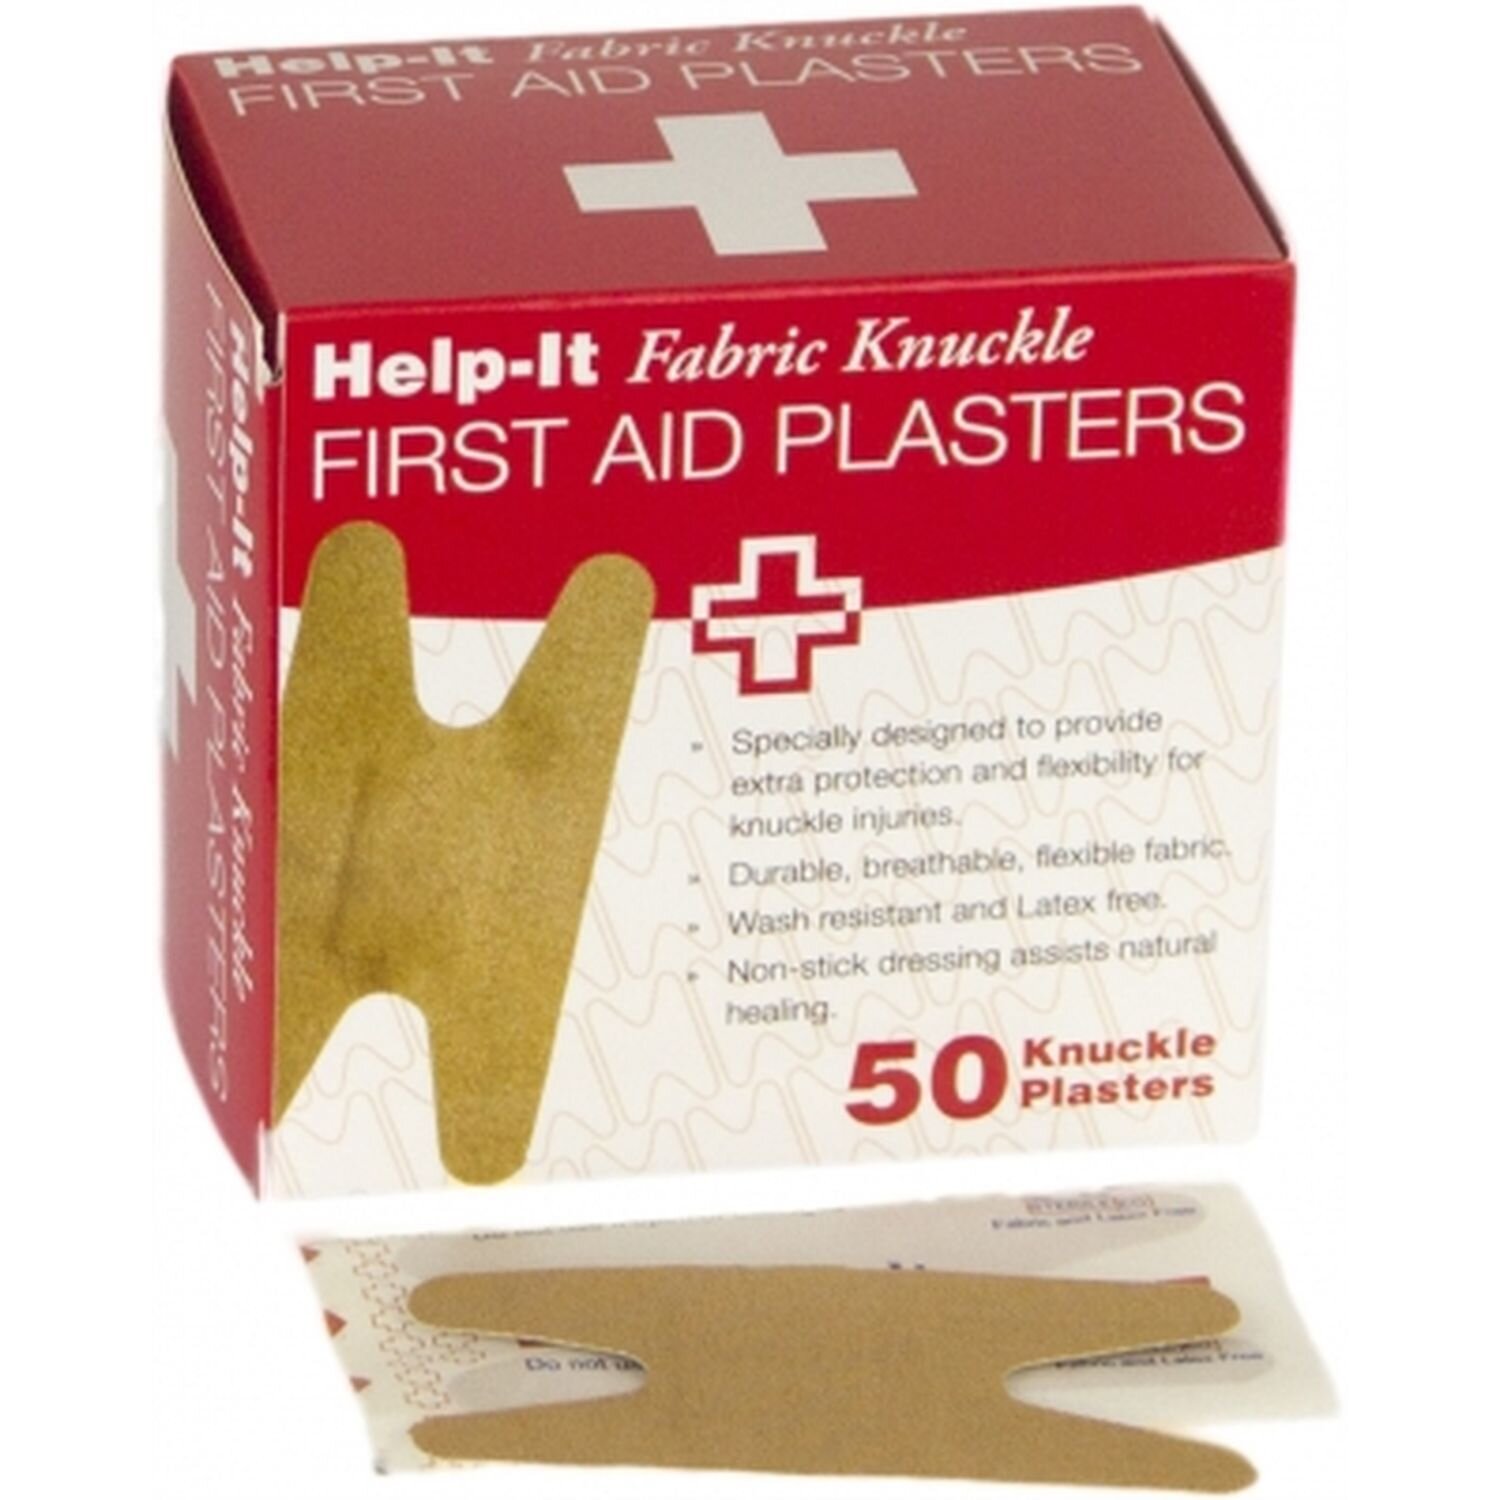 50 Assorted Fabric Knuckle Plasters